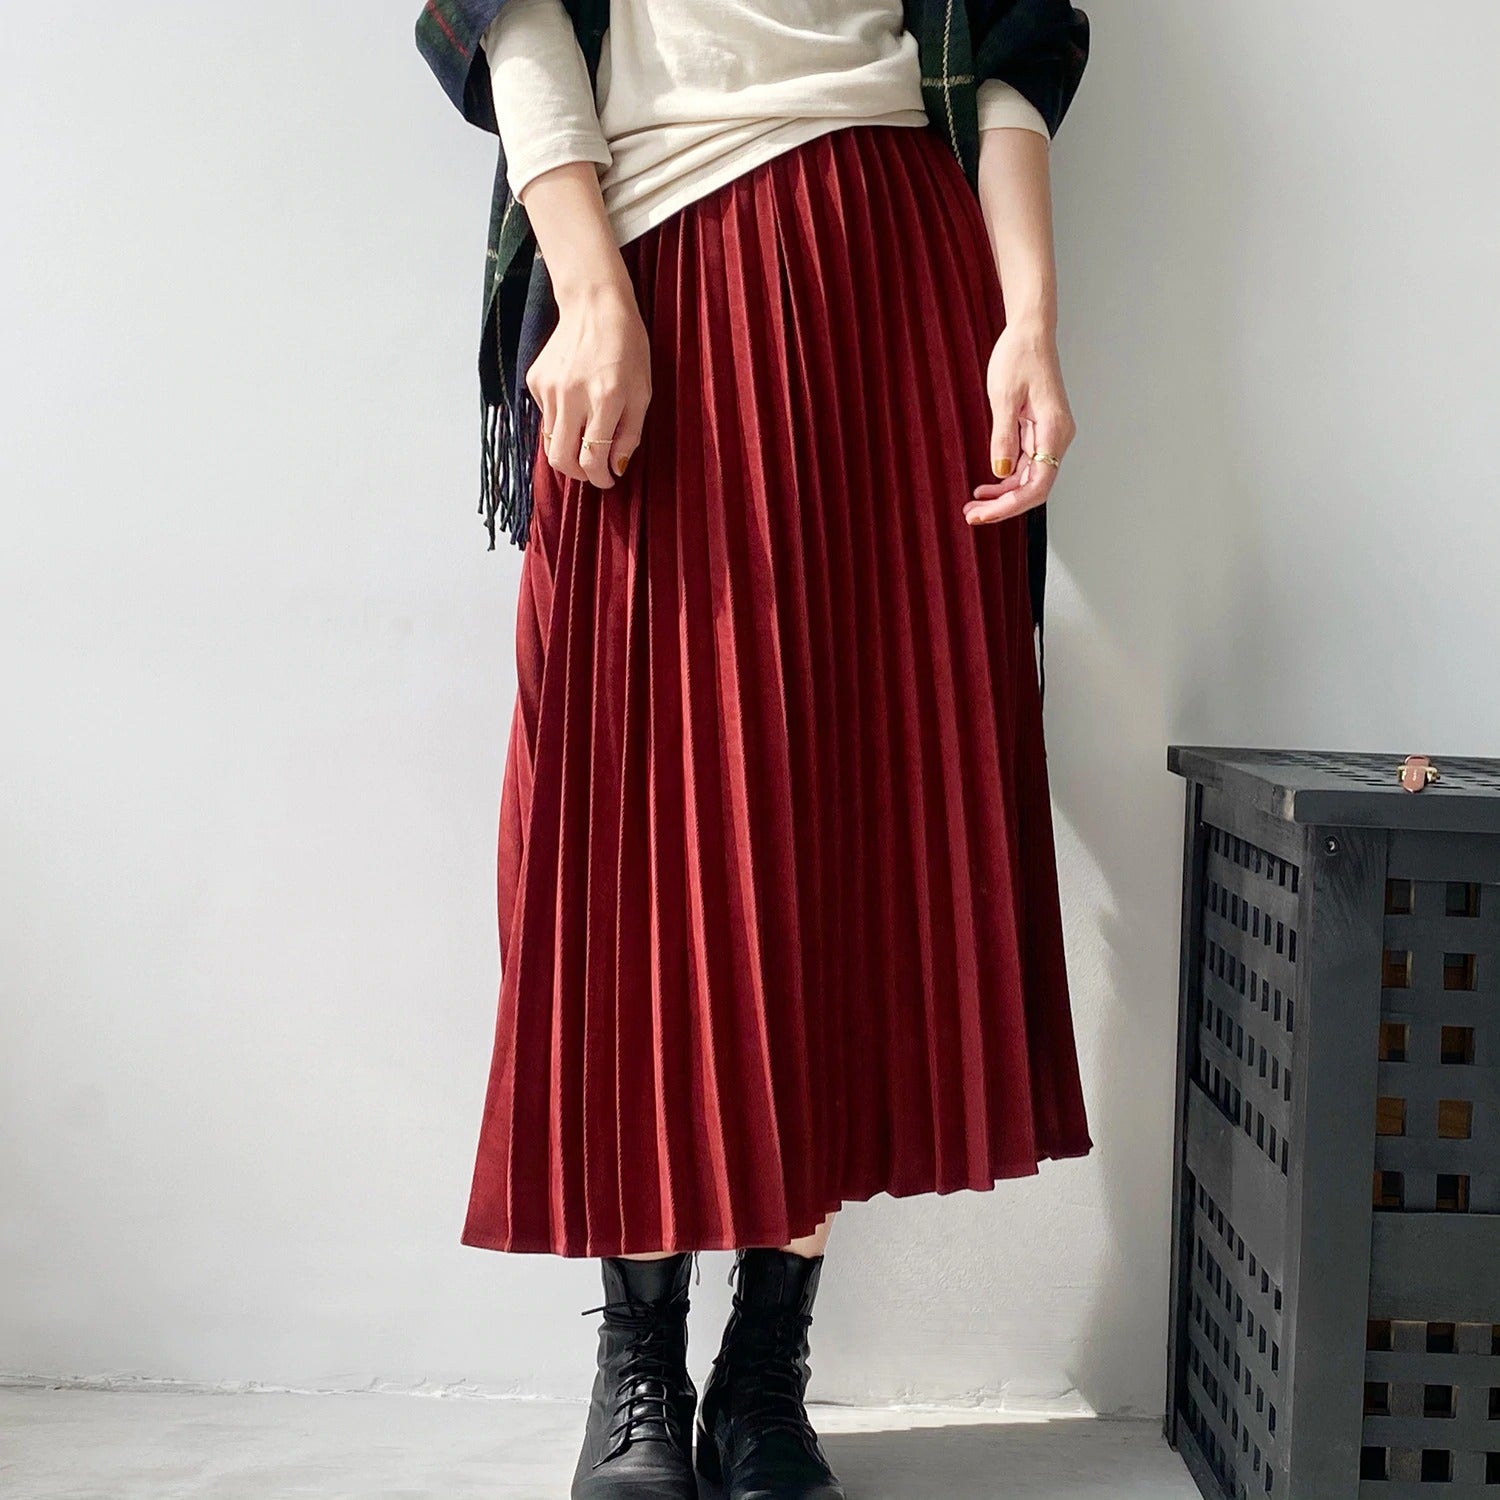 High Waist Pure Color pleated Skirt - SixtyKey new model design Dubai fashion style 2021 best price